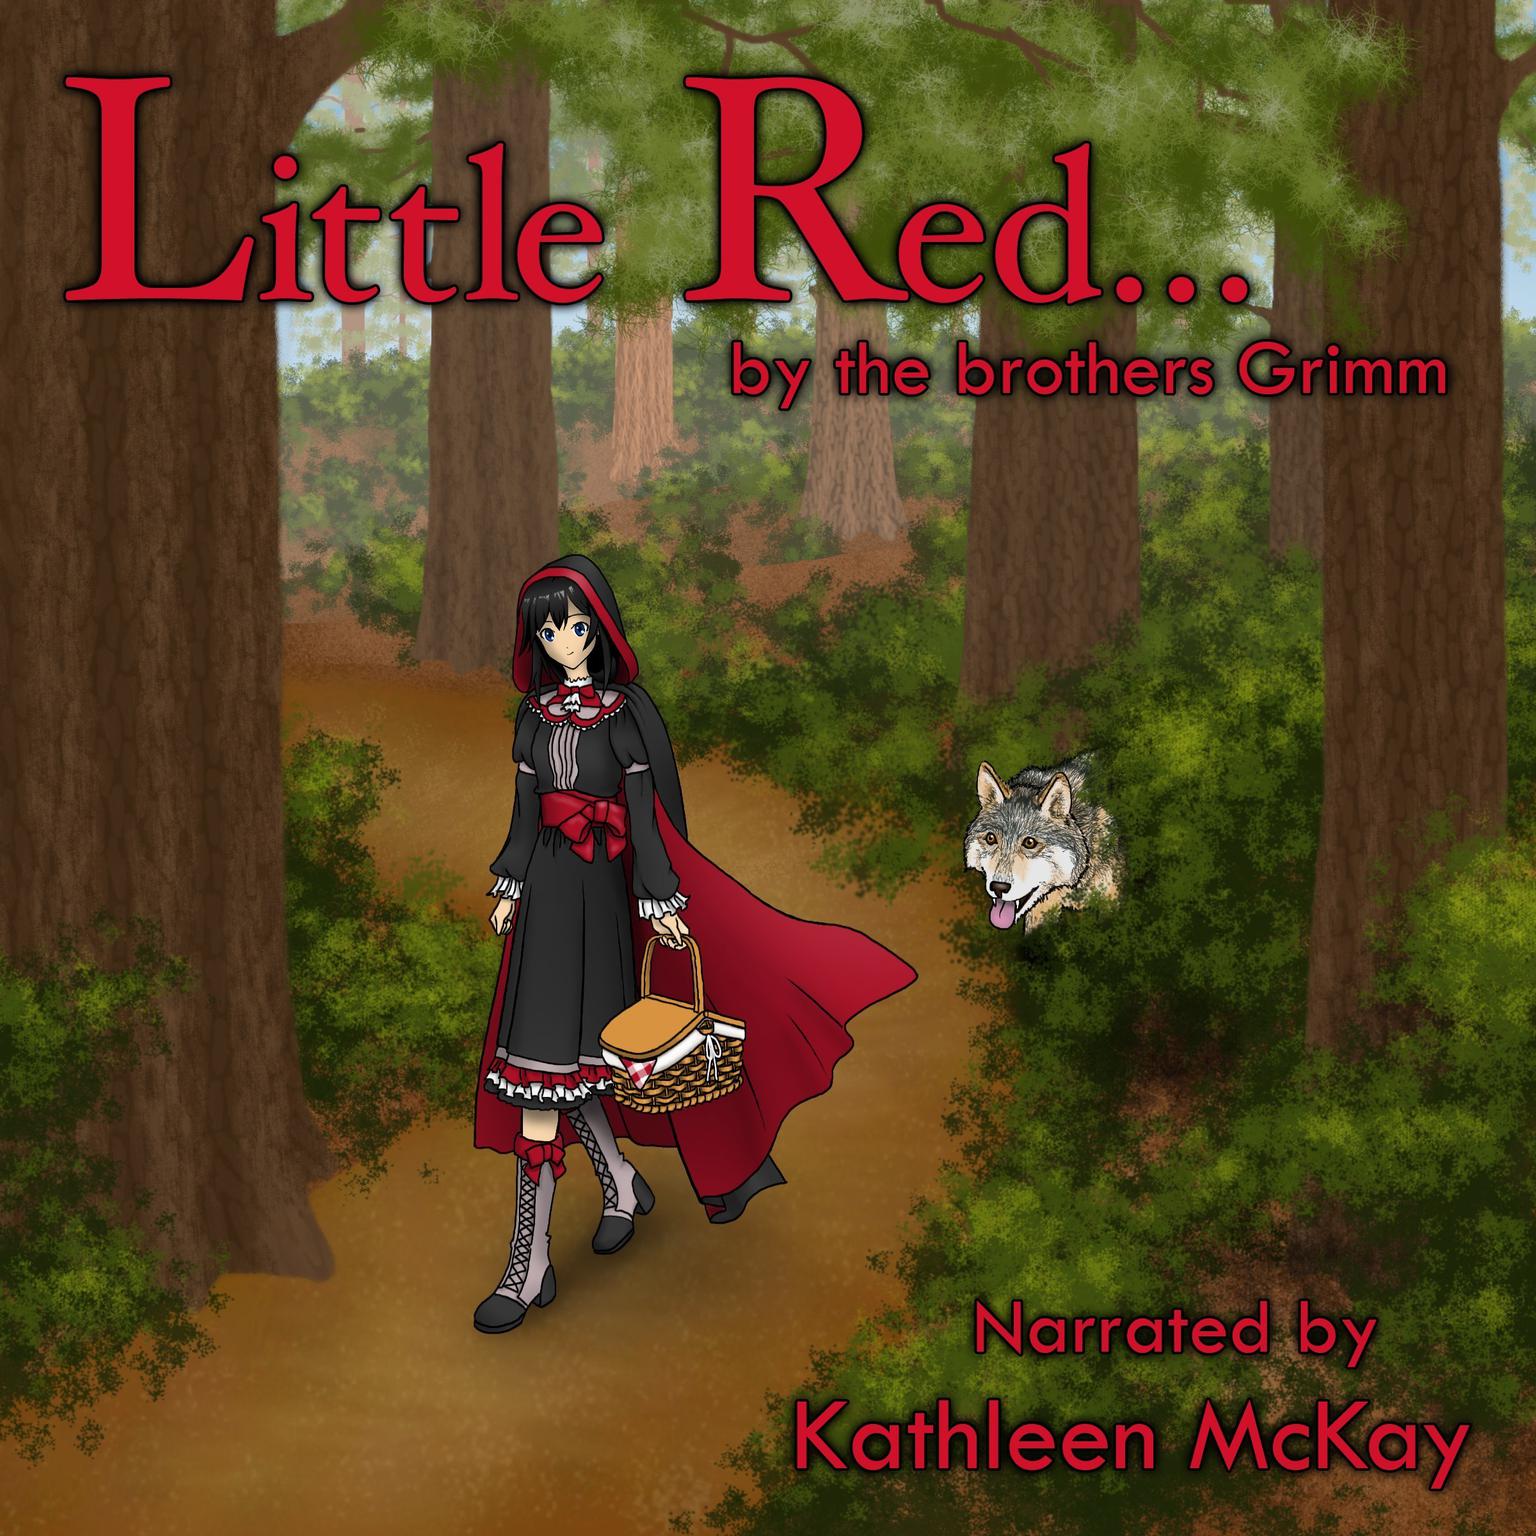 Little Red... by The Brothers Grimm narrated by Kathleen McKay Audiobook, by Kathleen McKay